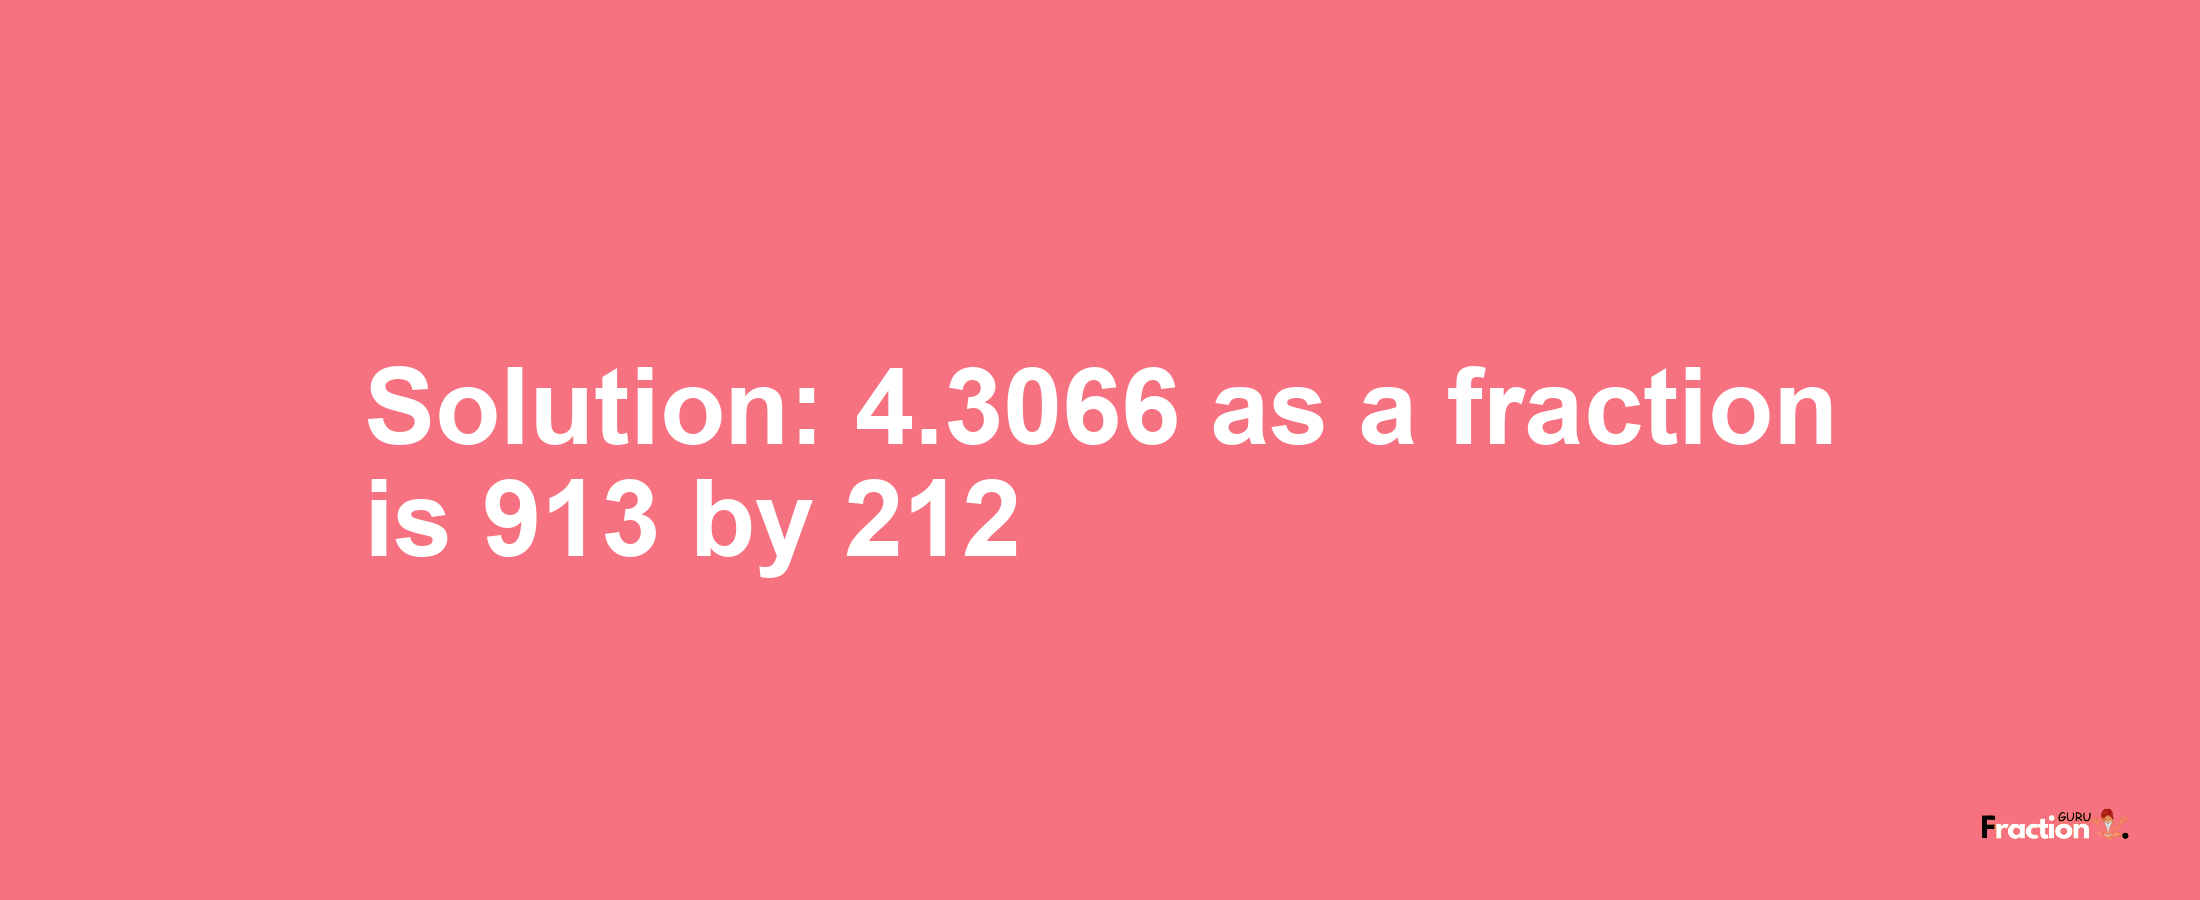 Solution:4.3066 as a fraction is 913/212